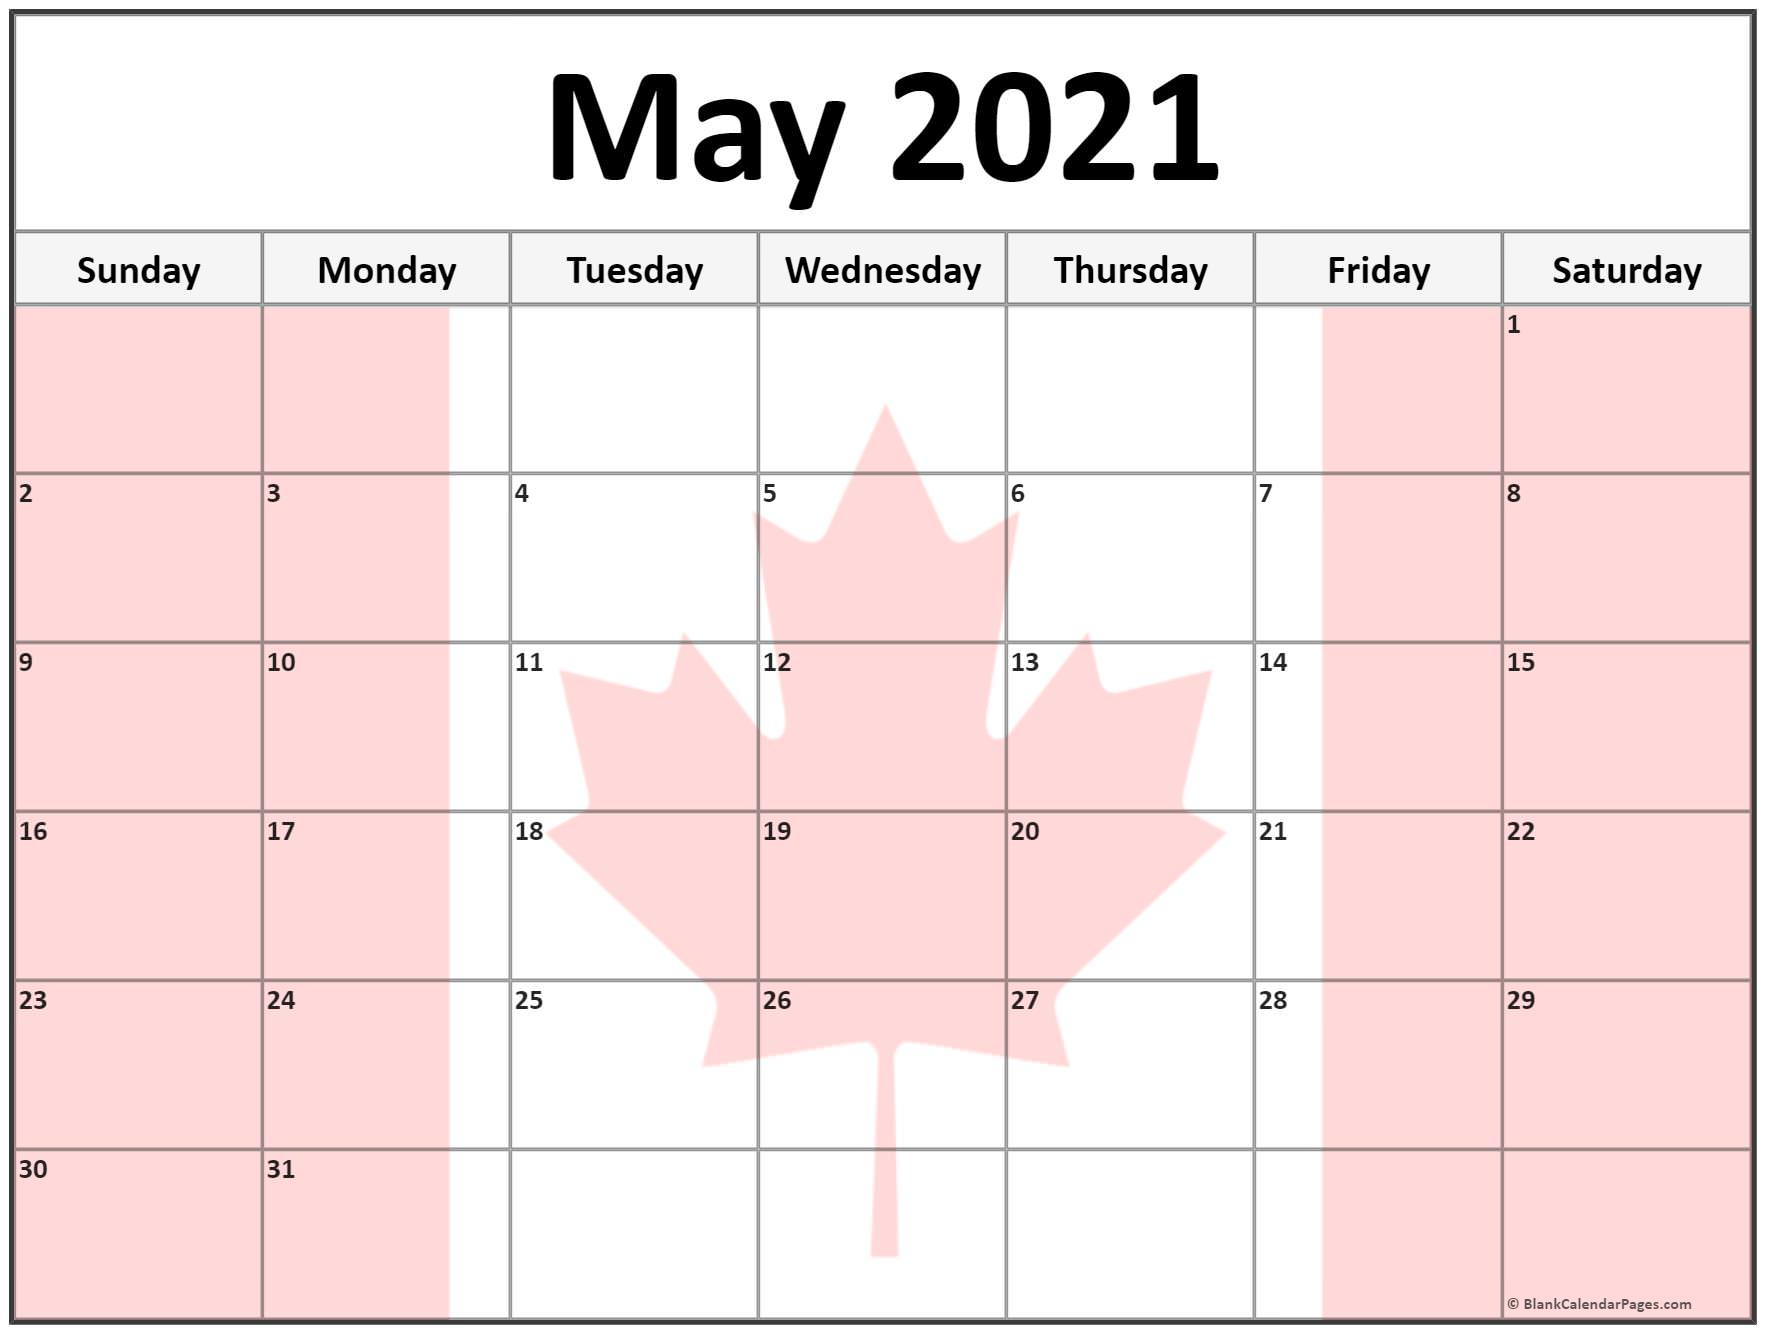 Collection Of May 2021 Photo Calendars With Image Filters.